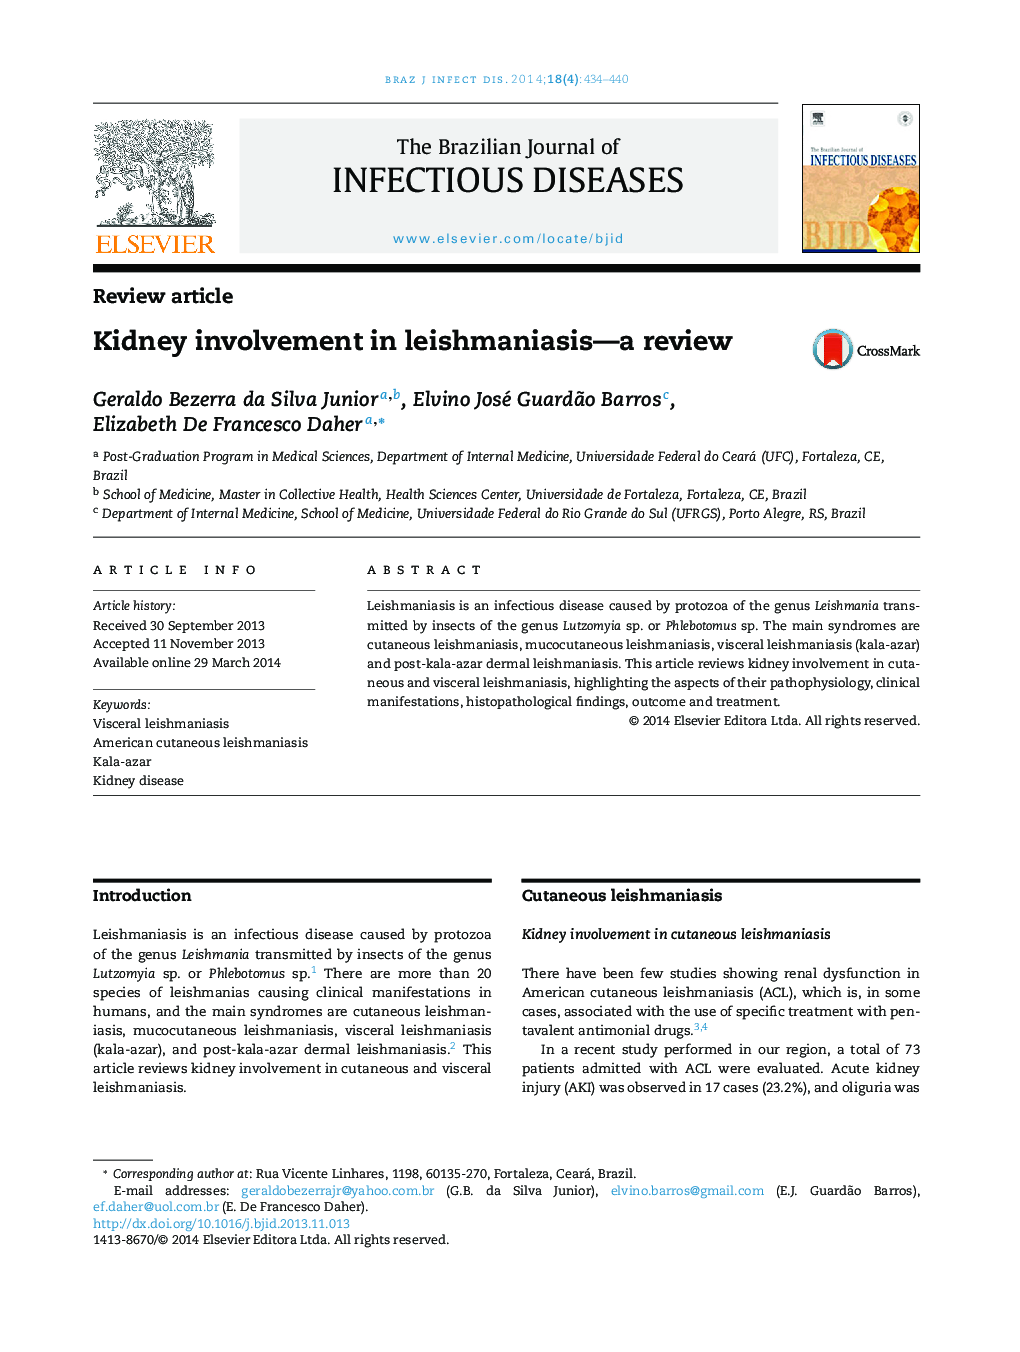 Kidney involvement in leishmaniasis—a review